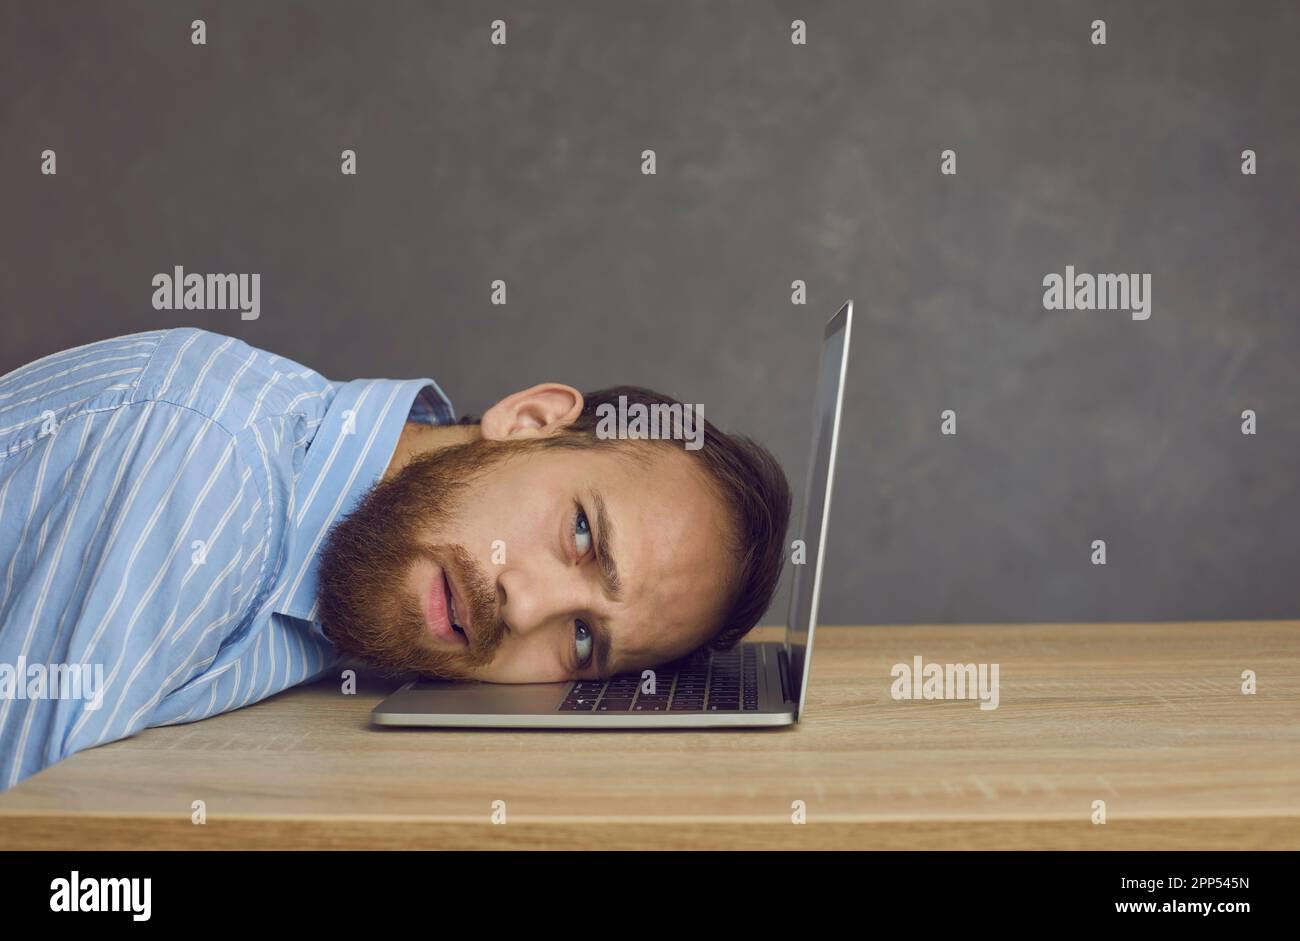 Business man freelancer lying on laptop keyboard with tired grimace on face Stock Photo